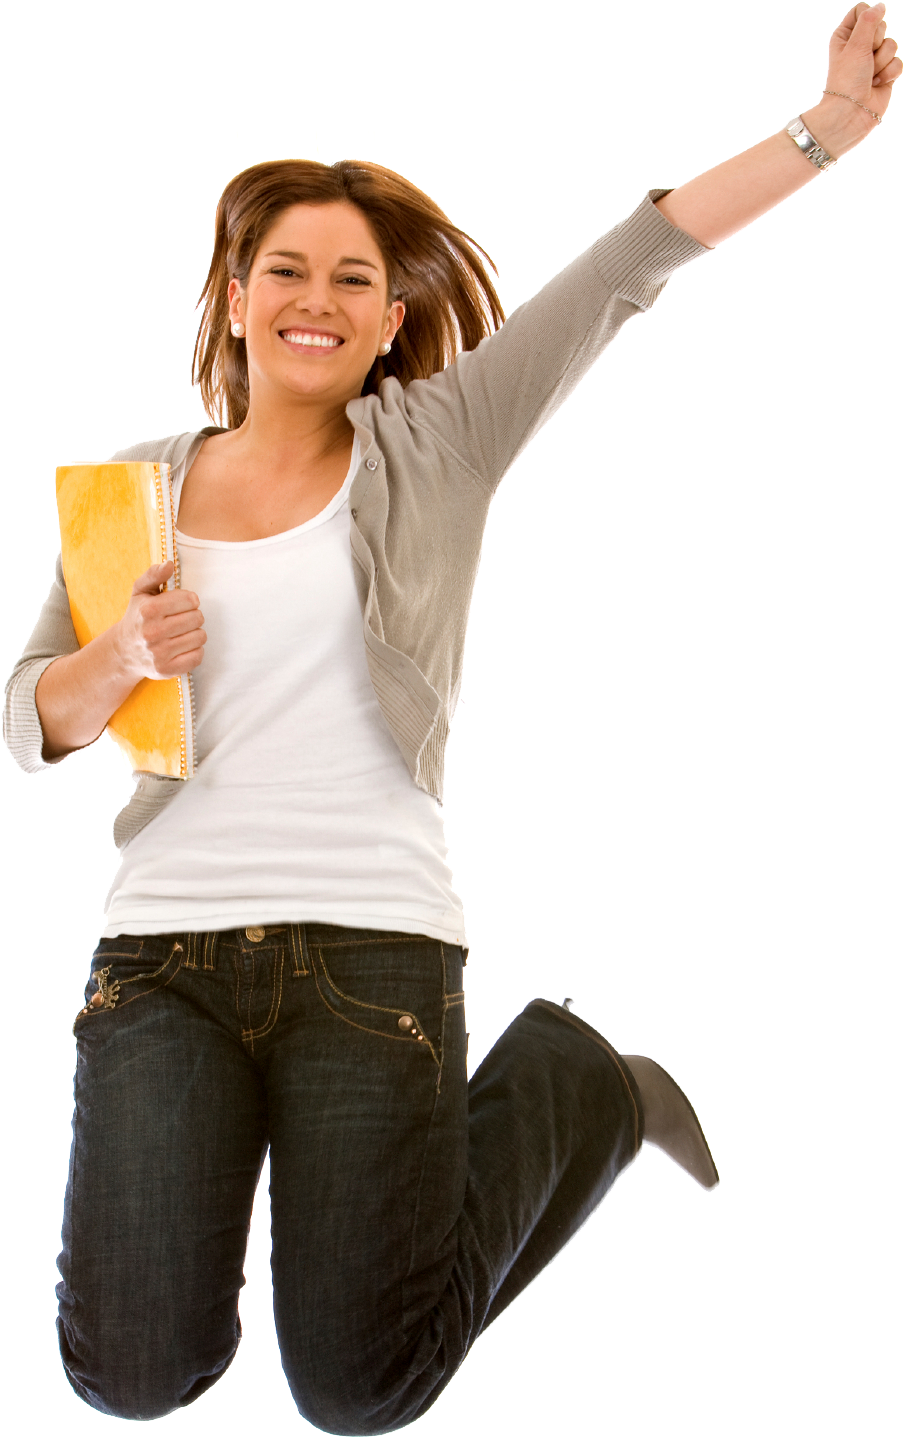 Accurate Student Visa Information - Happy Girl Transparent Background (954x1467)